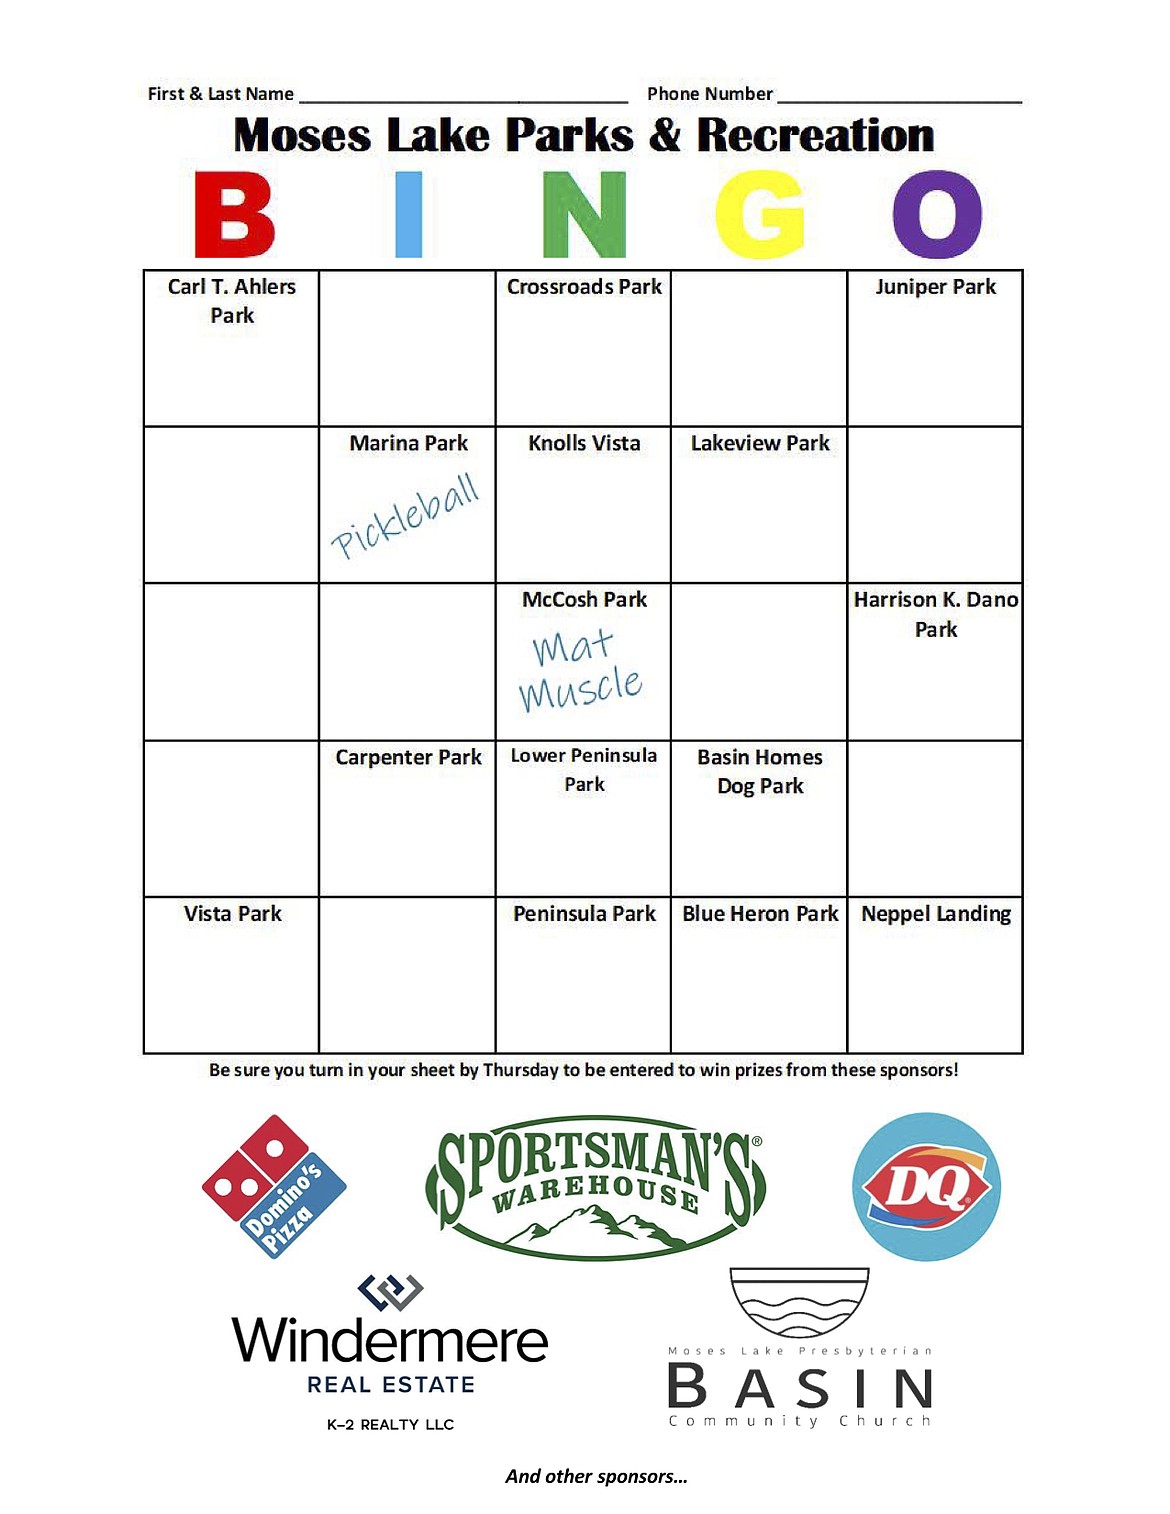 A copy of the updated Bingo sheet for Parks Bingo Scavenger Hunt heading into the third week of the October event sponsored by Moses Lake Parks & Recreation.